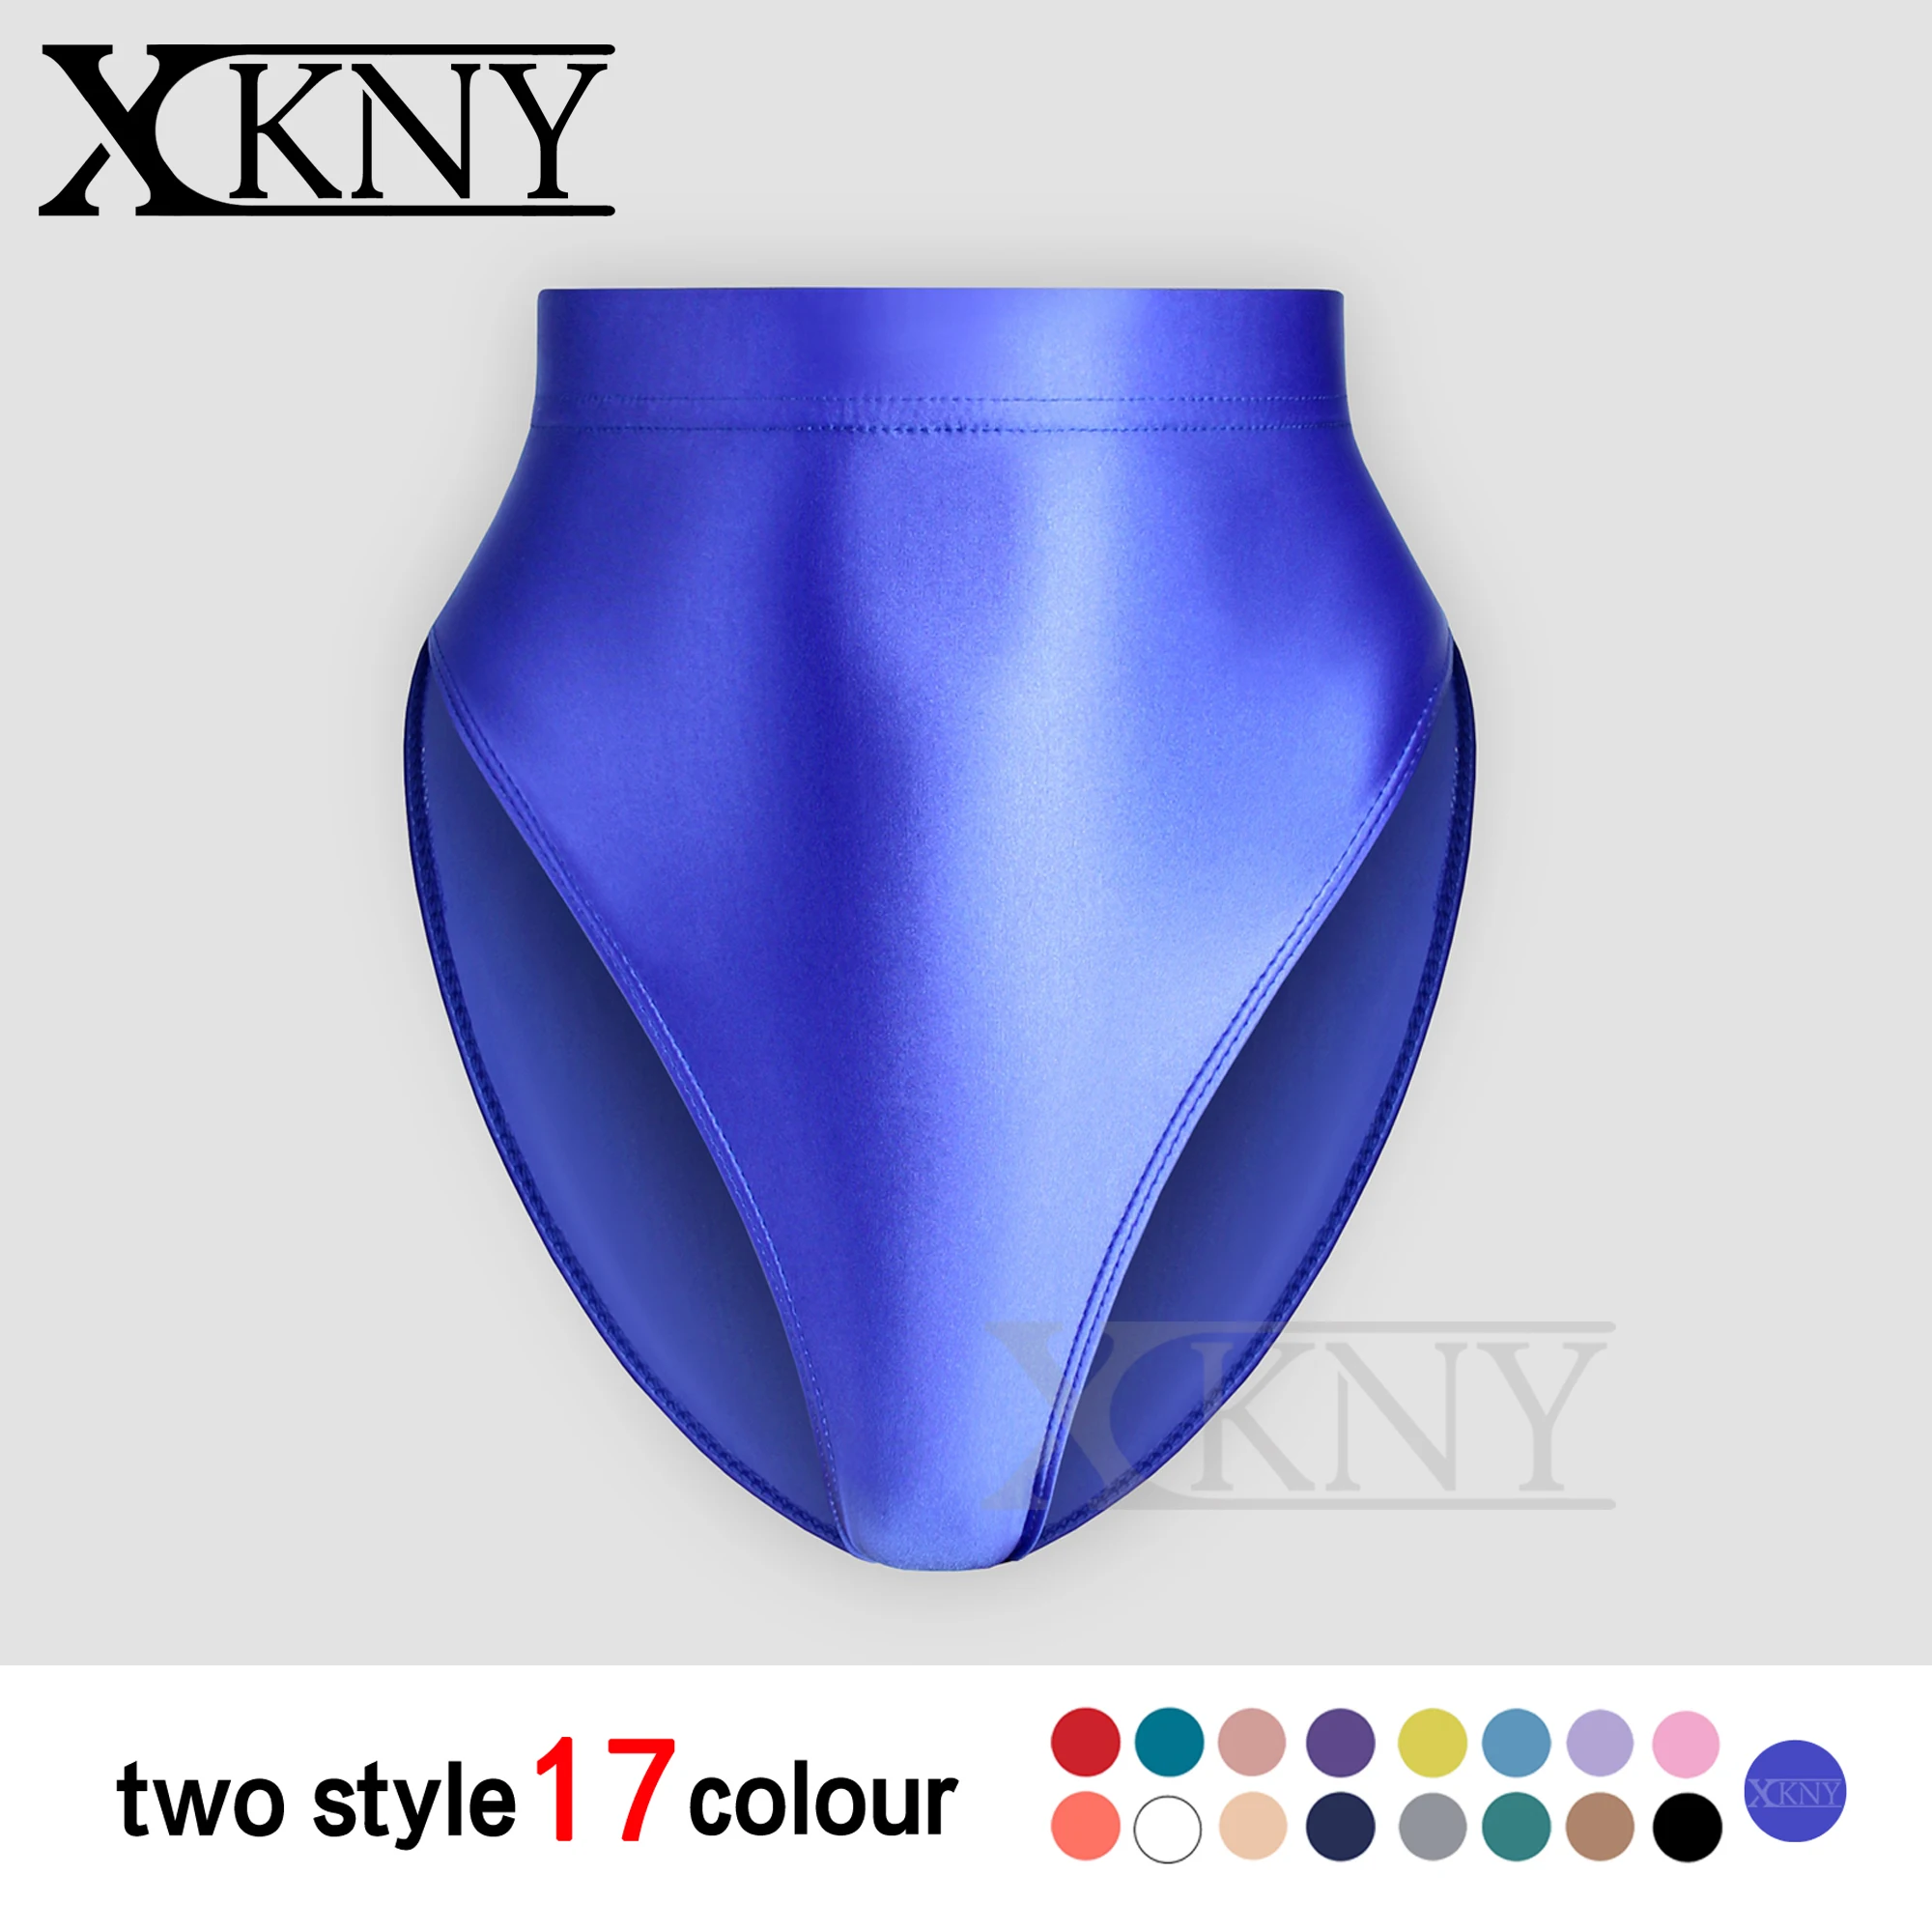 

XCKNY satin glossy t-shaped pants with buttocks sexy solid bikini high waist sexy tights underpants briefs swimming trunks